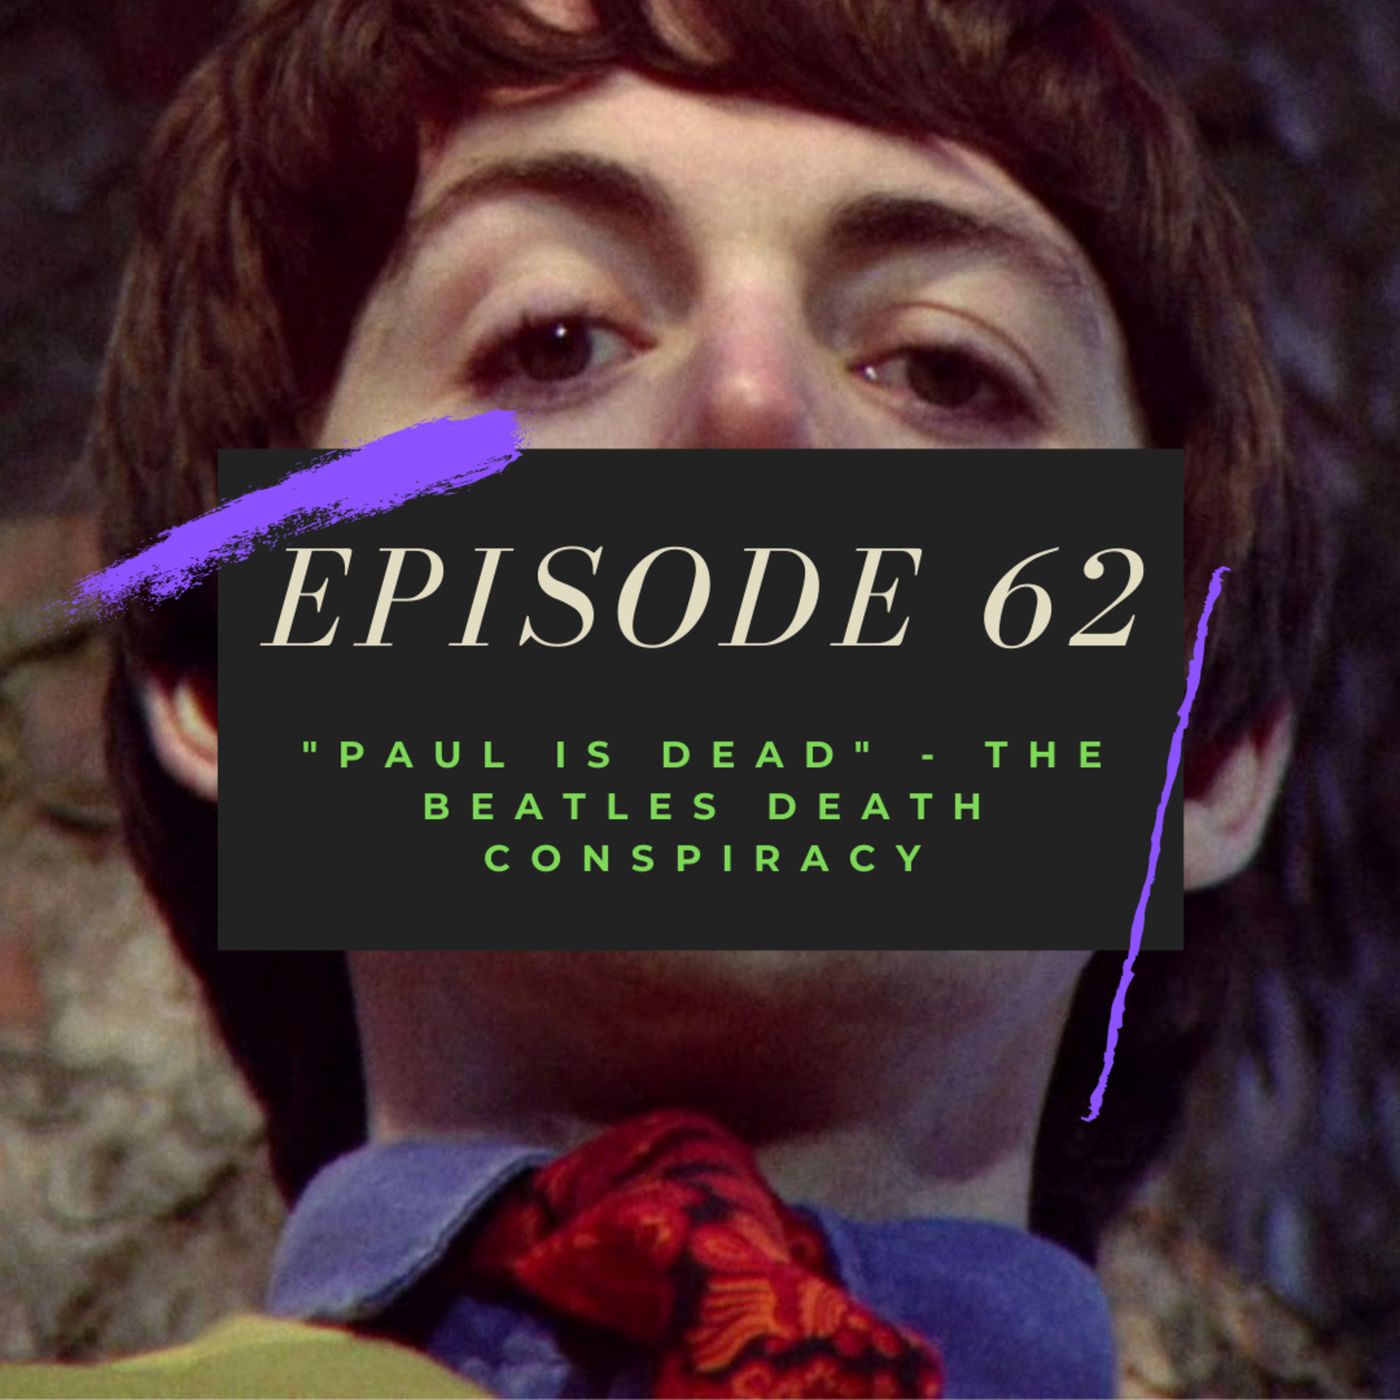 Ep. 62: "Paul is Dead" - The Beatles Death Conspiracy Image